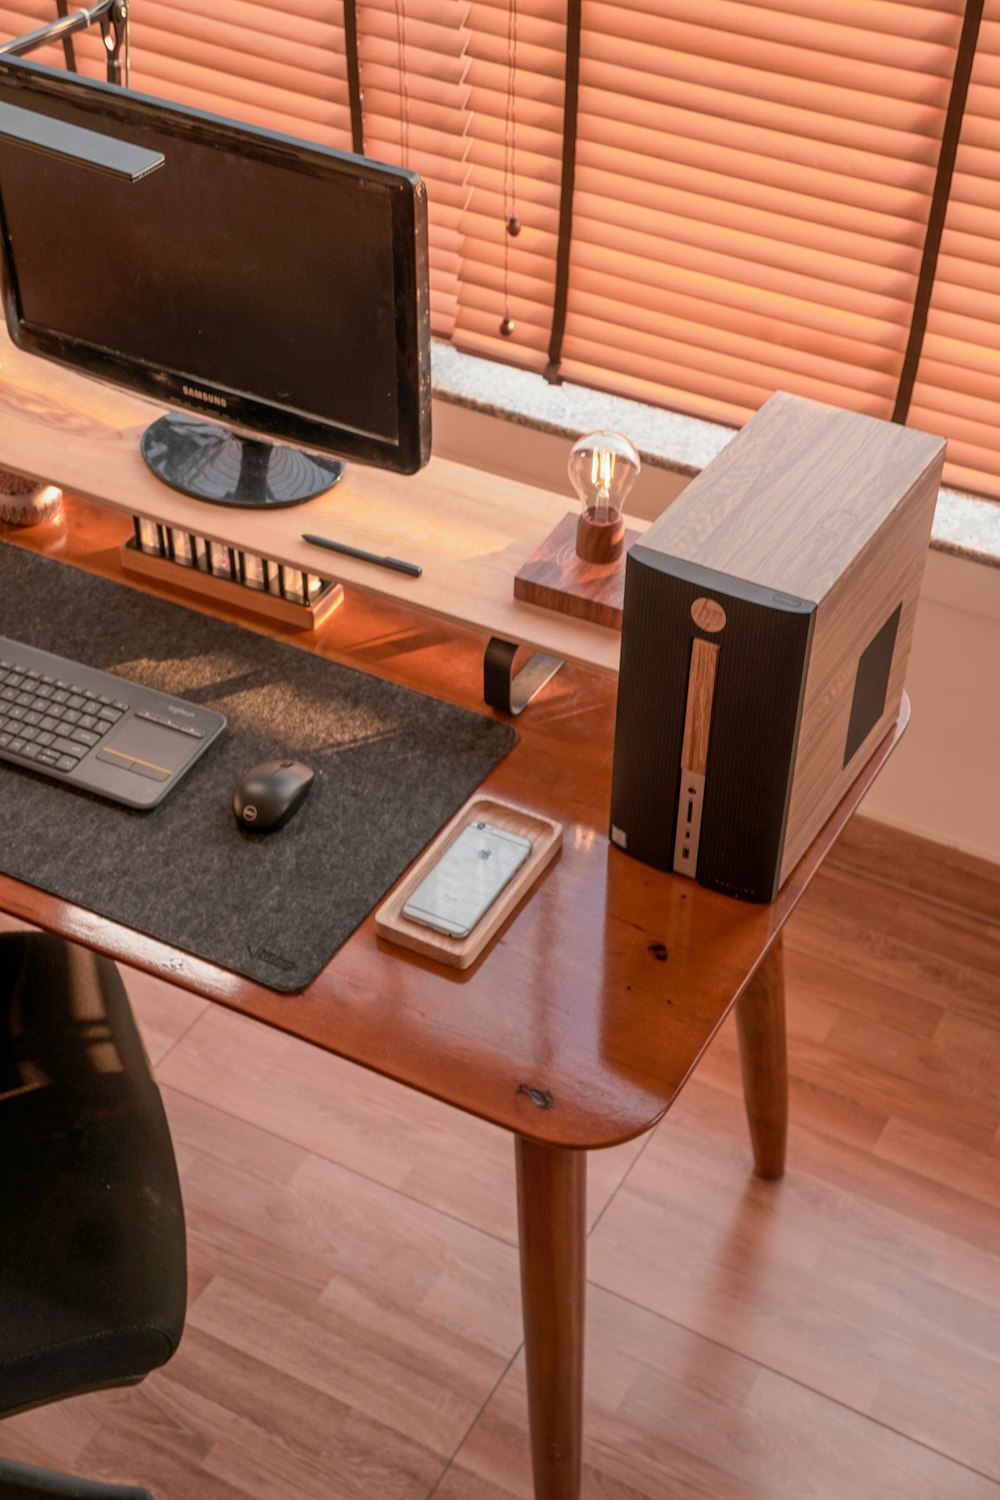 a computer desk with a monitor, keyboard and mouse